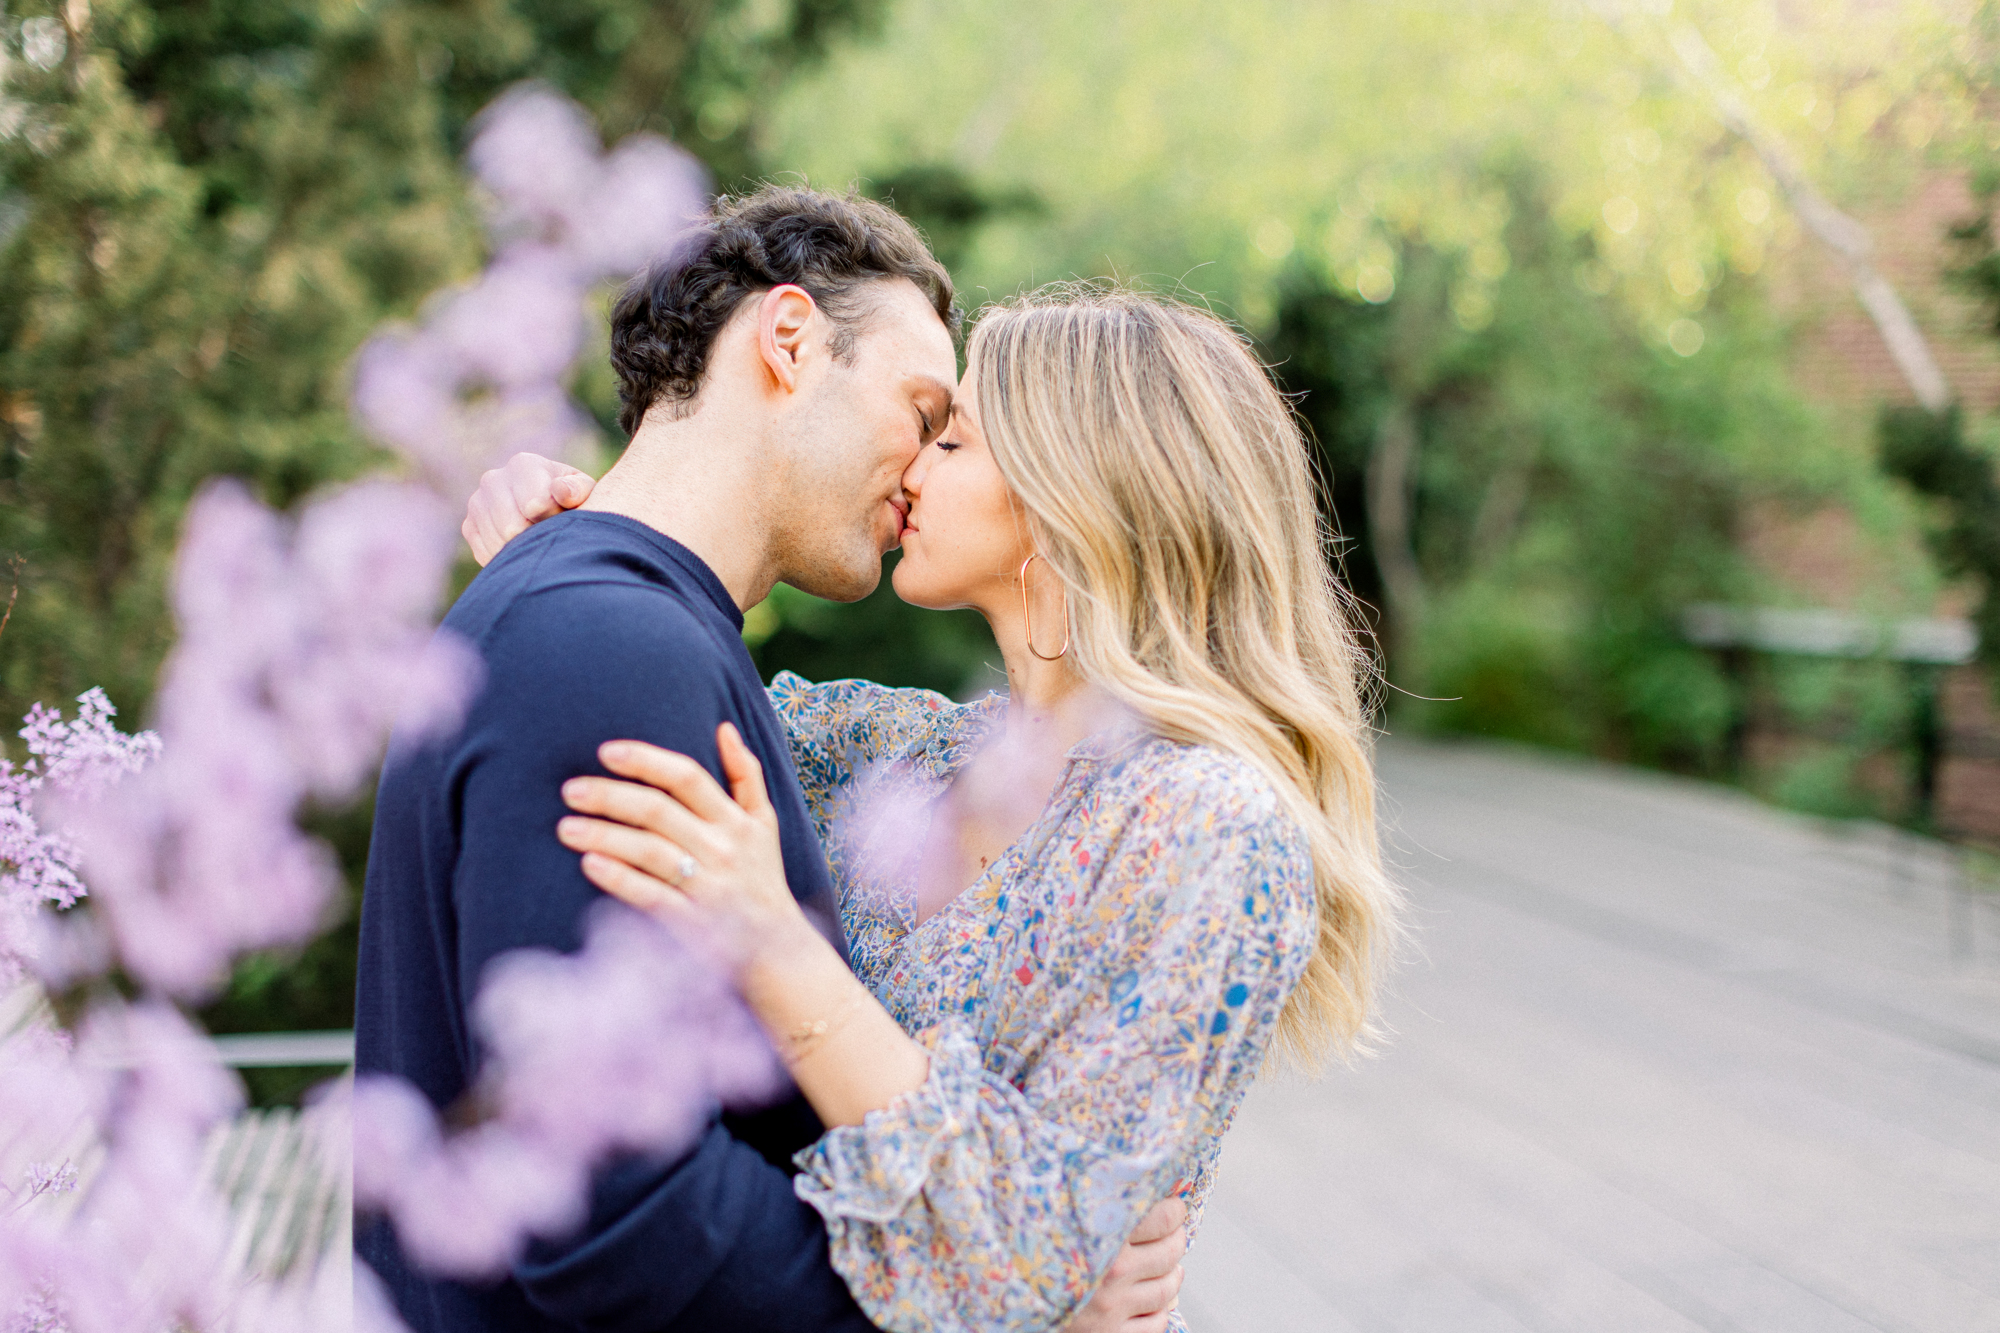 Intimate High Line Engagement Photos